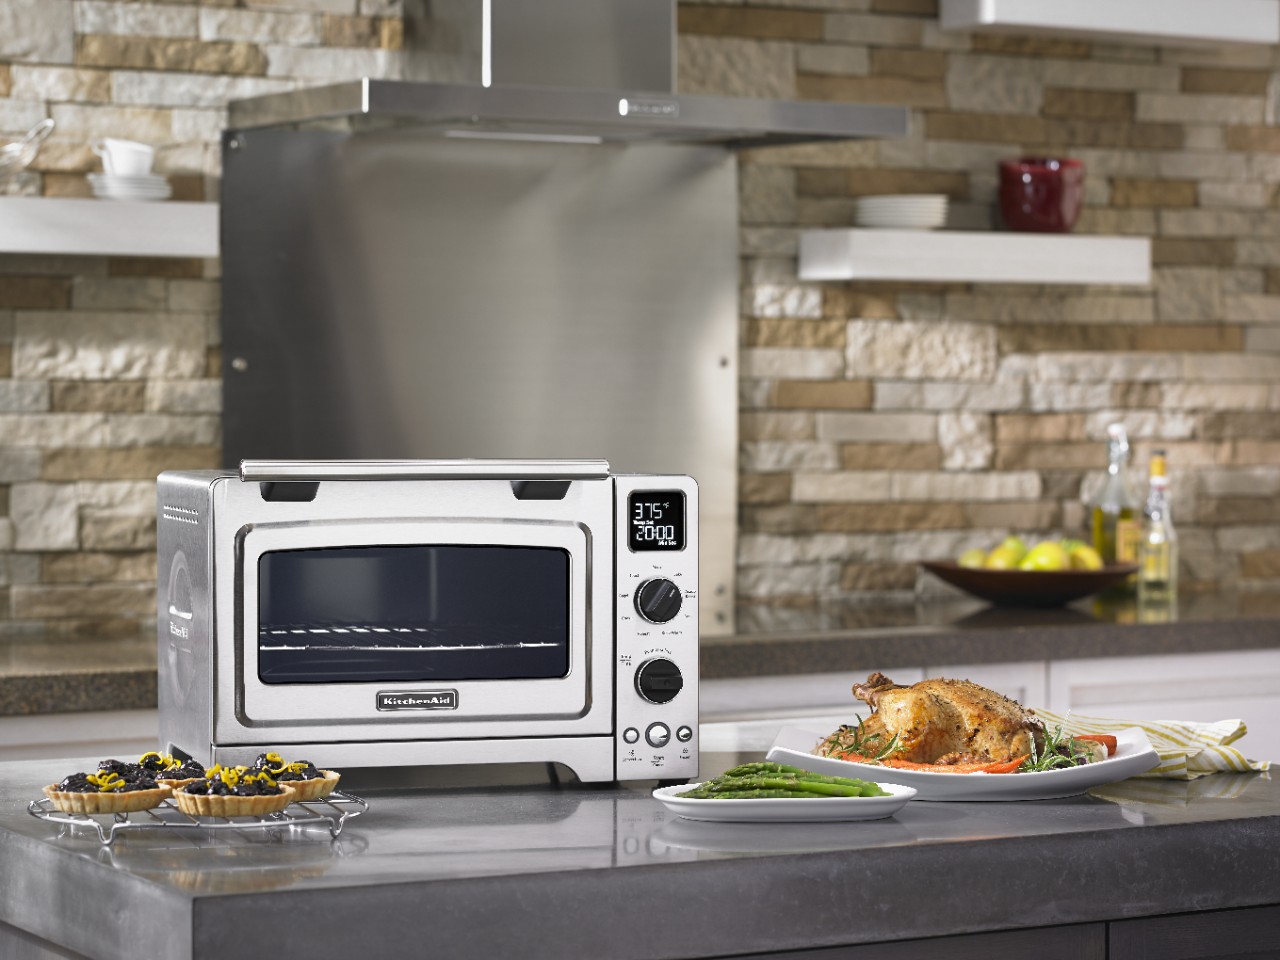 Find the right accessories for your KitchenAid® countertop oven